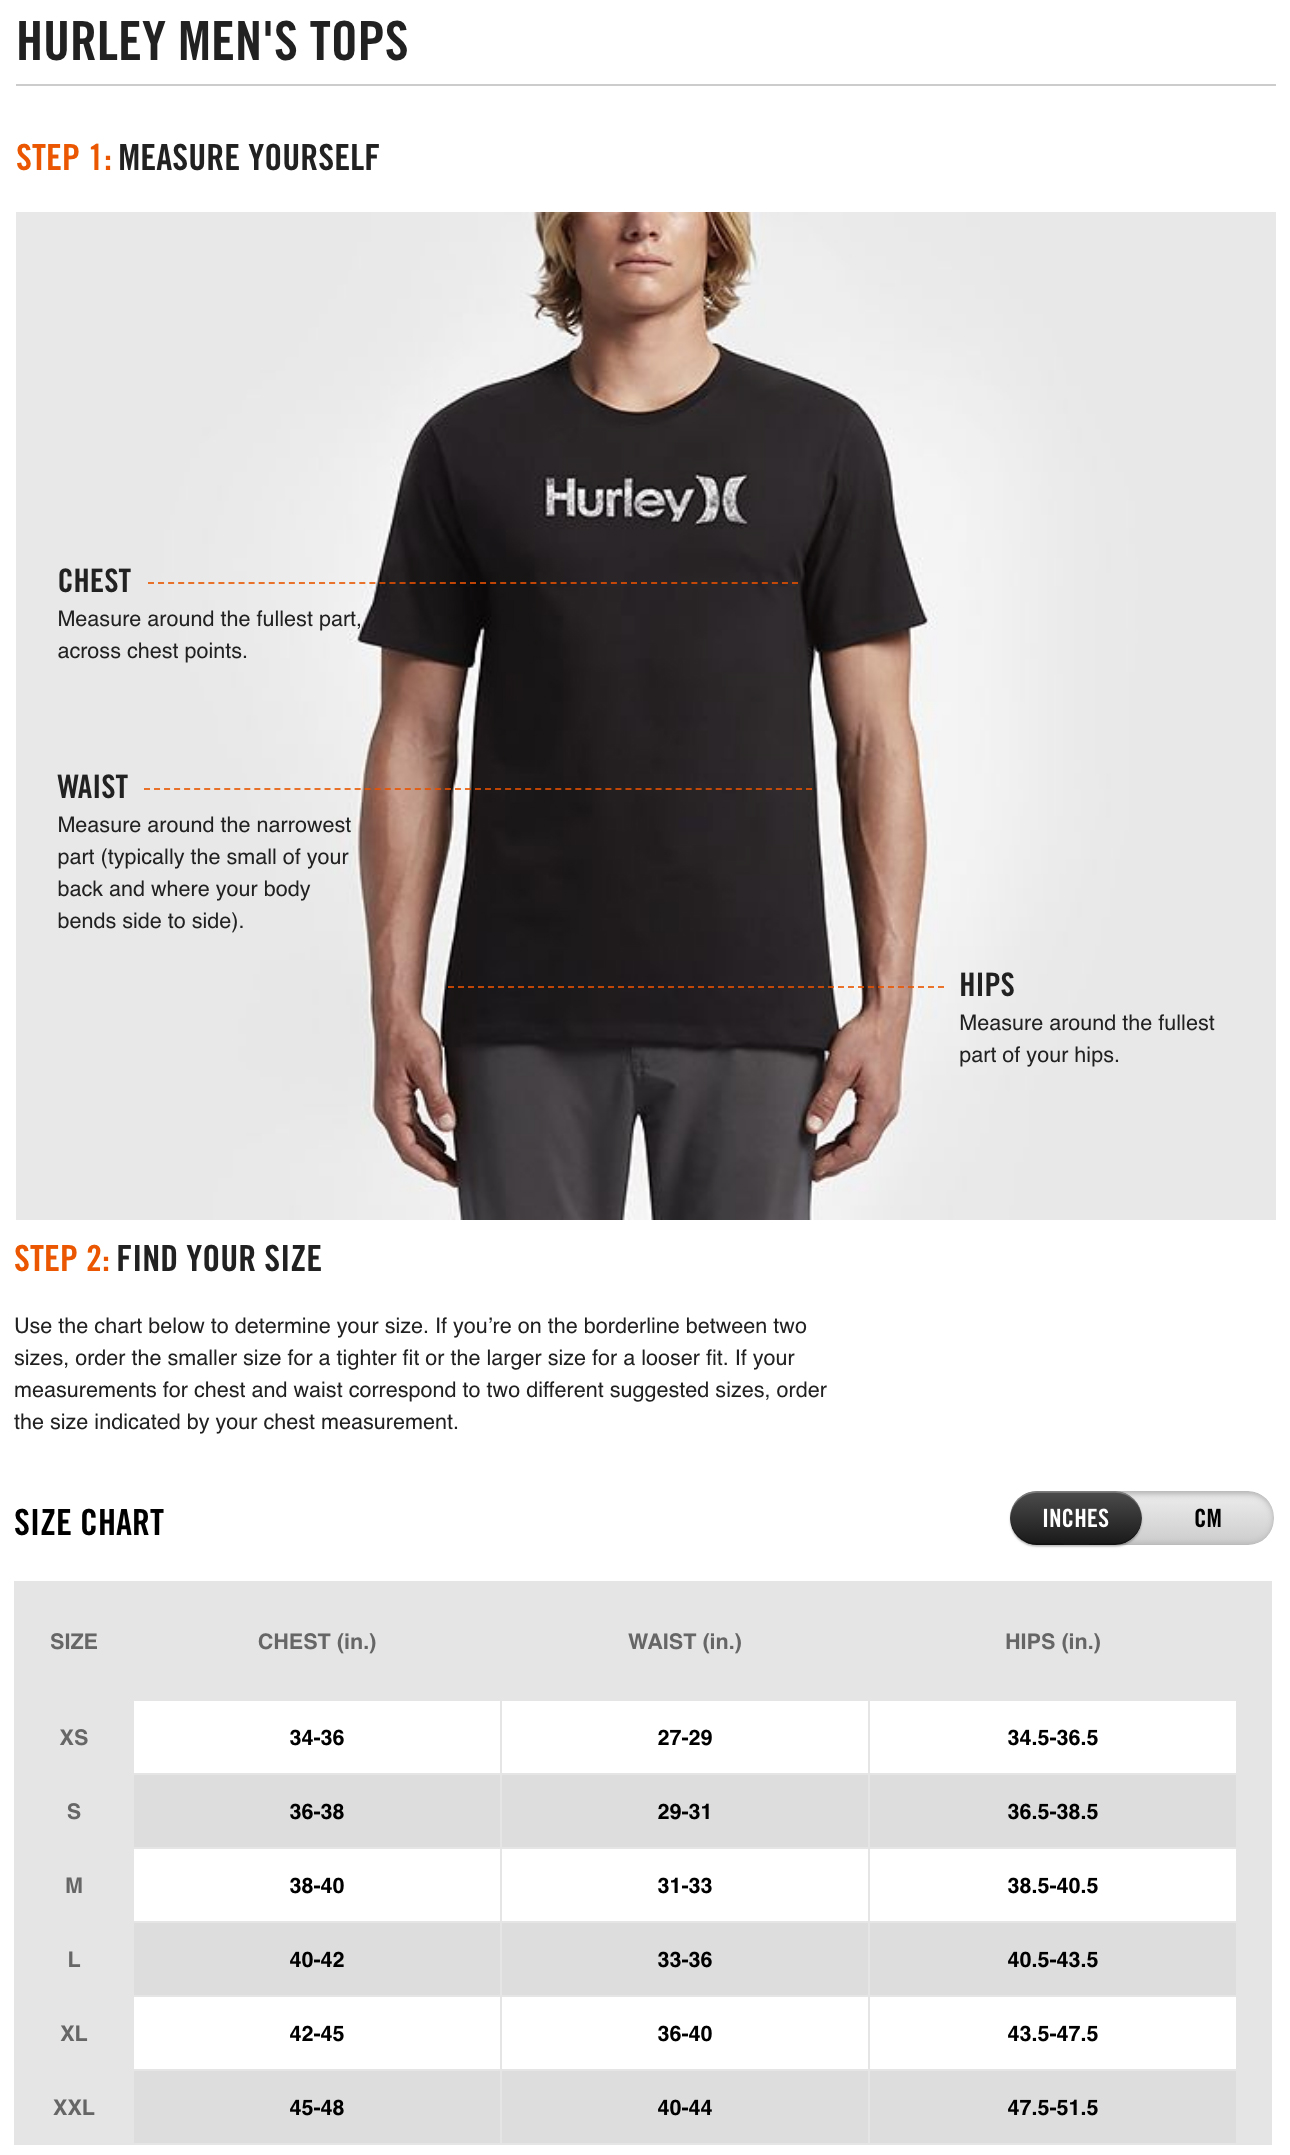 Hurley One & Only Gradient T-shirt - Surf apparel Shop online